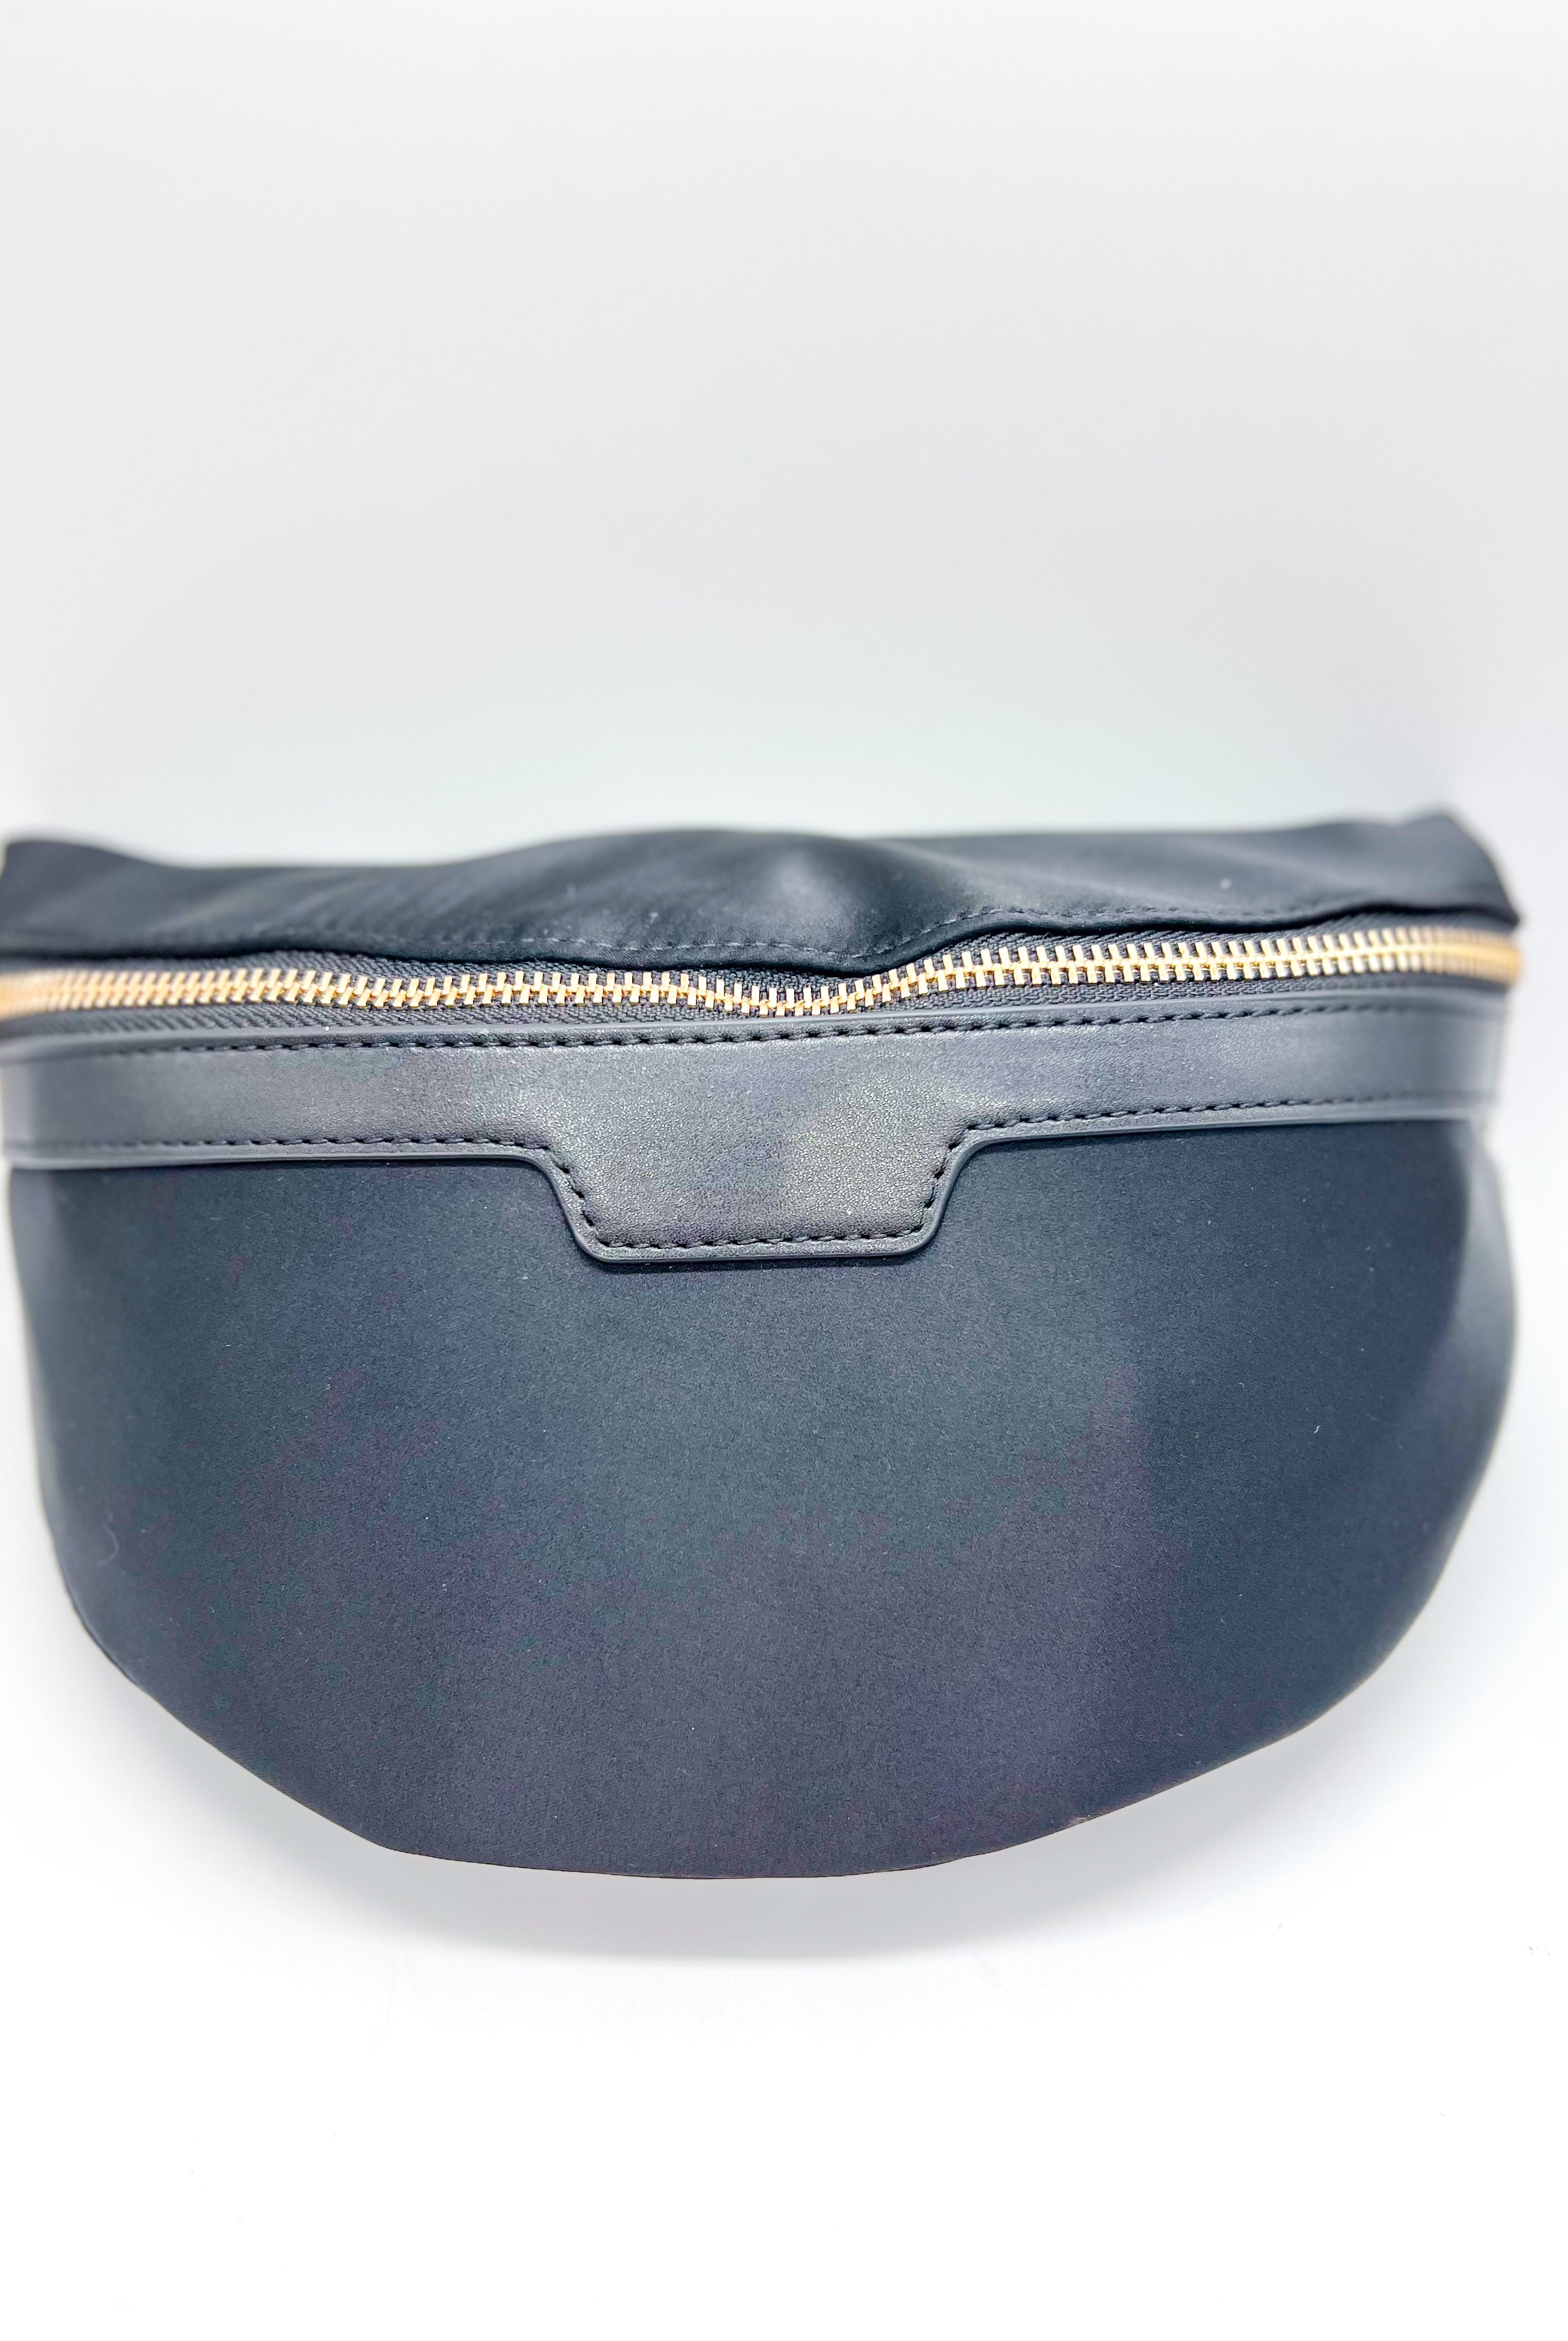 Made For Luxury Bum Bag-320 Bags-Jess Lea-Heathered Boho Boutique, Women's Fashion and Accessories in Palmetto, FL